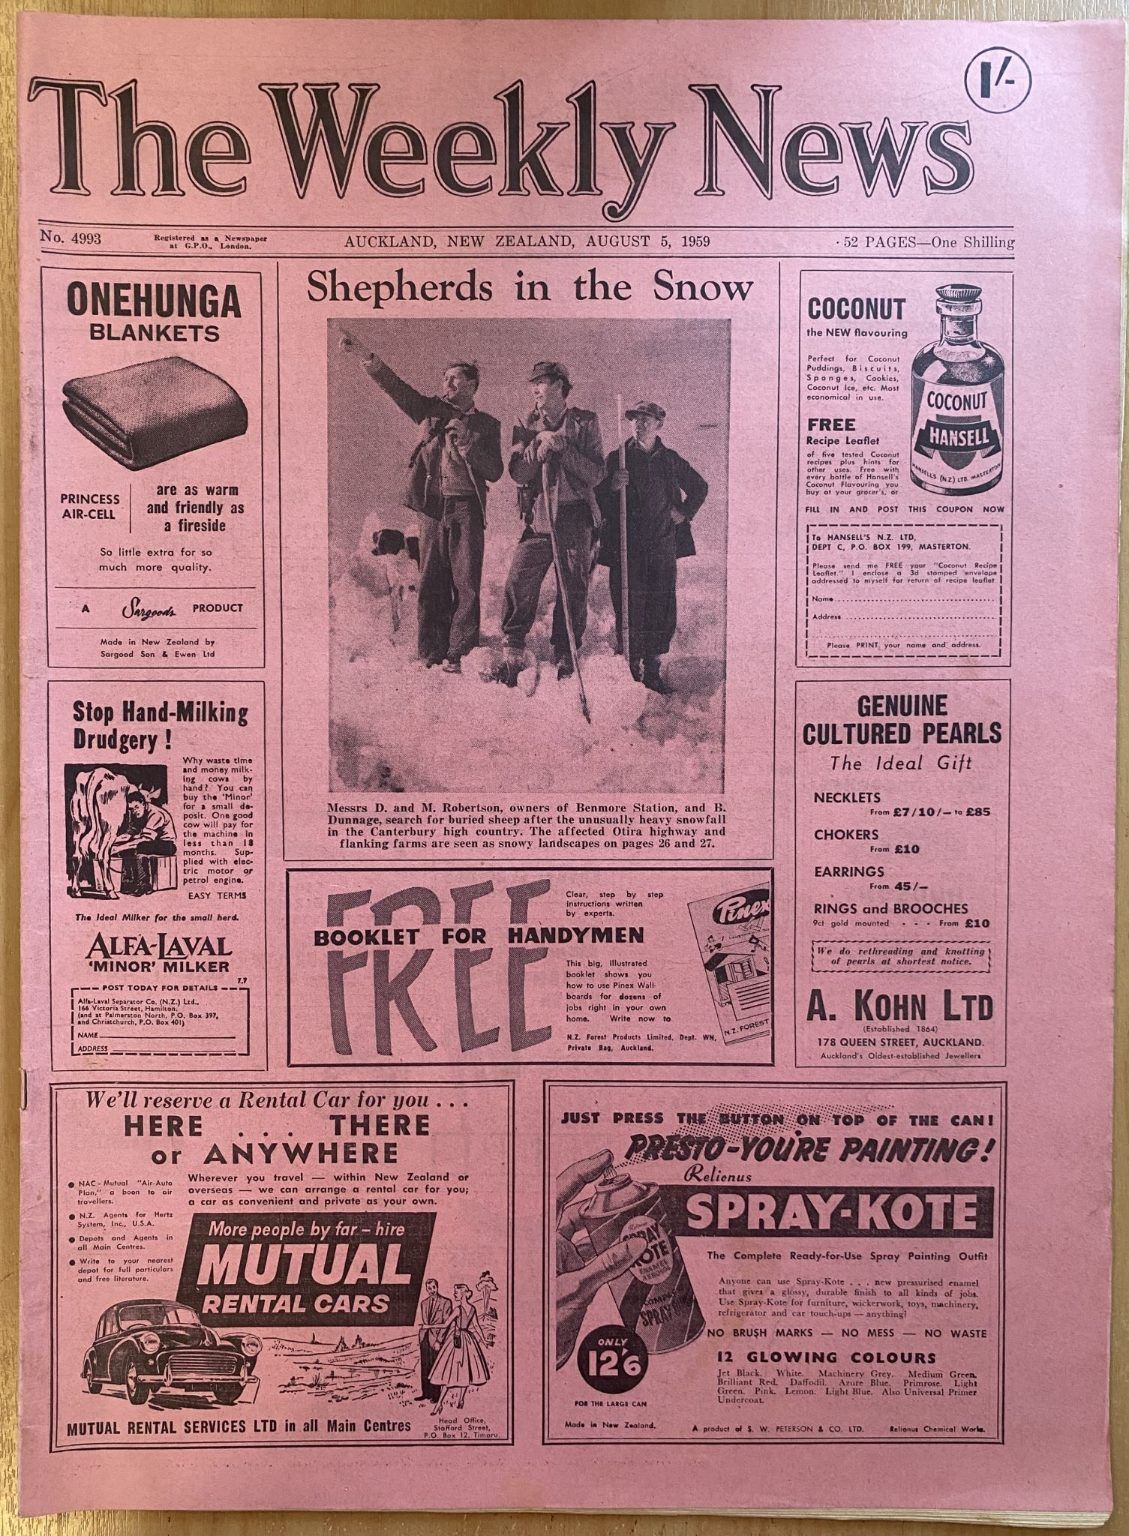 OLD NEWSPAPER: The Weekly News - No. 4993, 5 August 1959